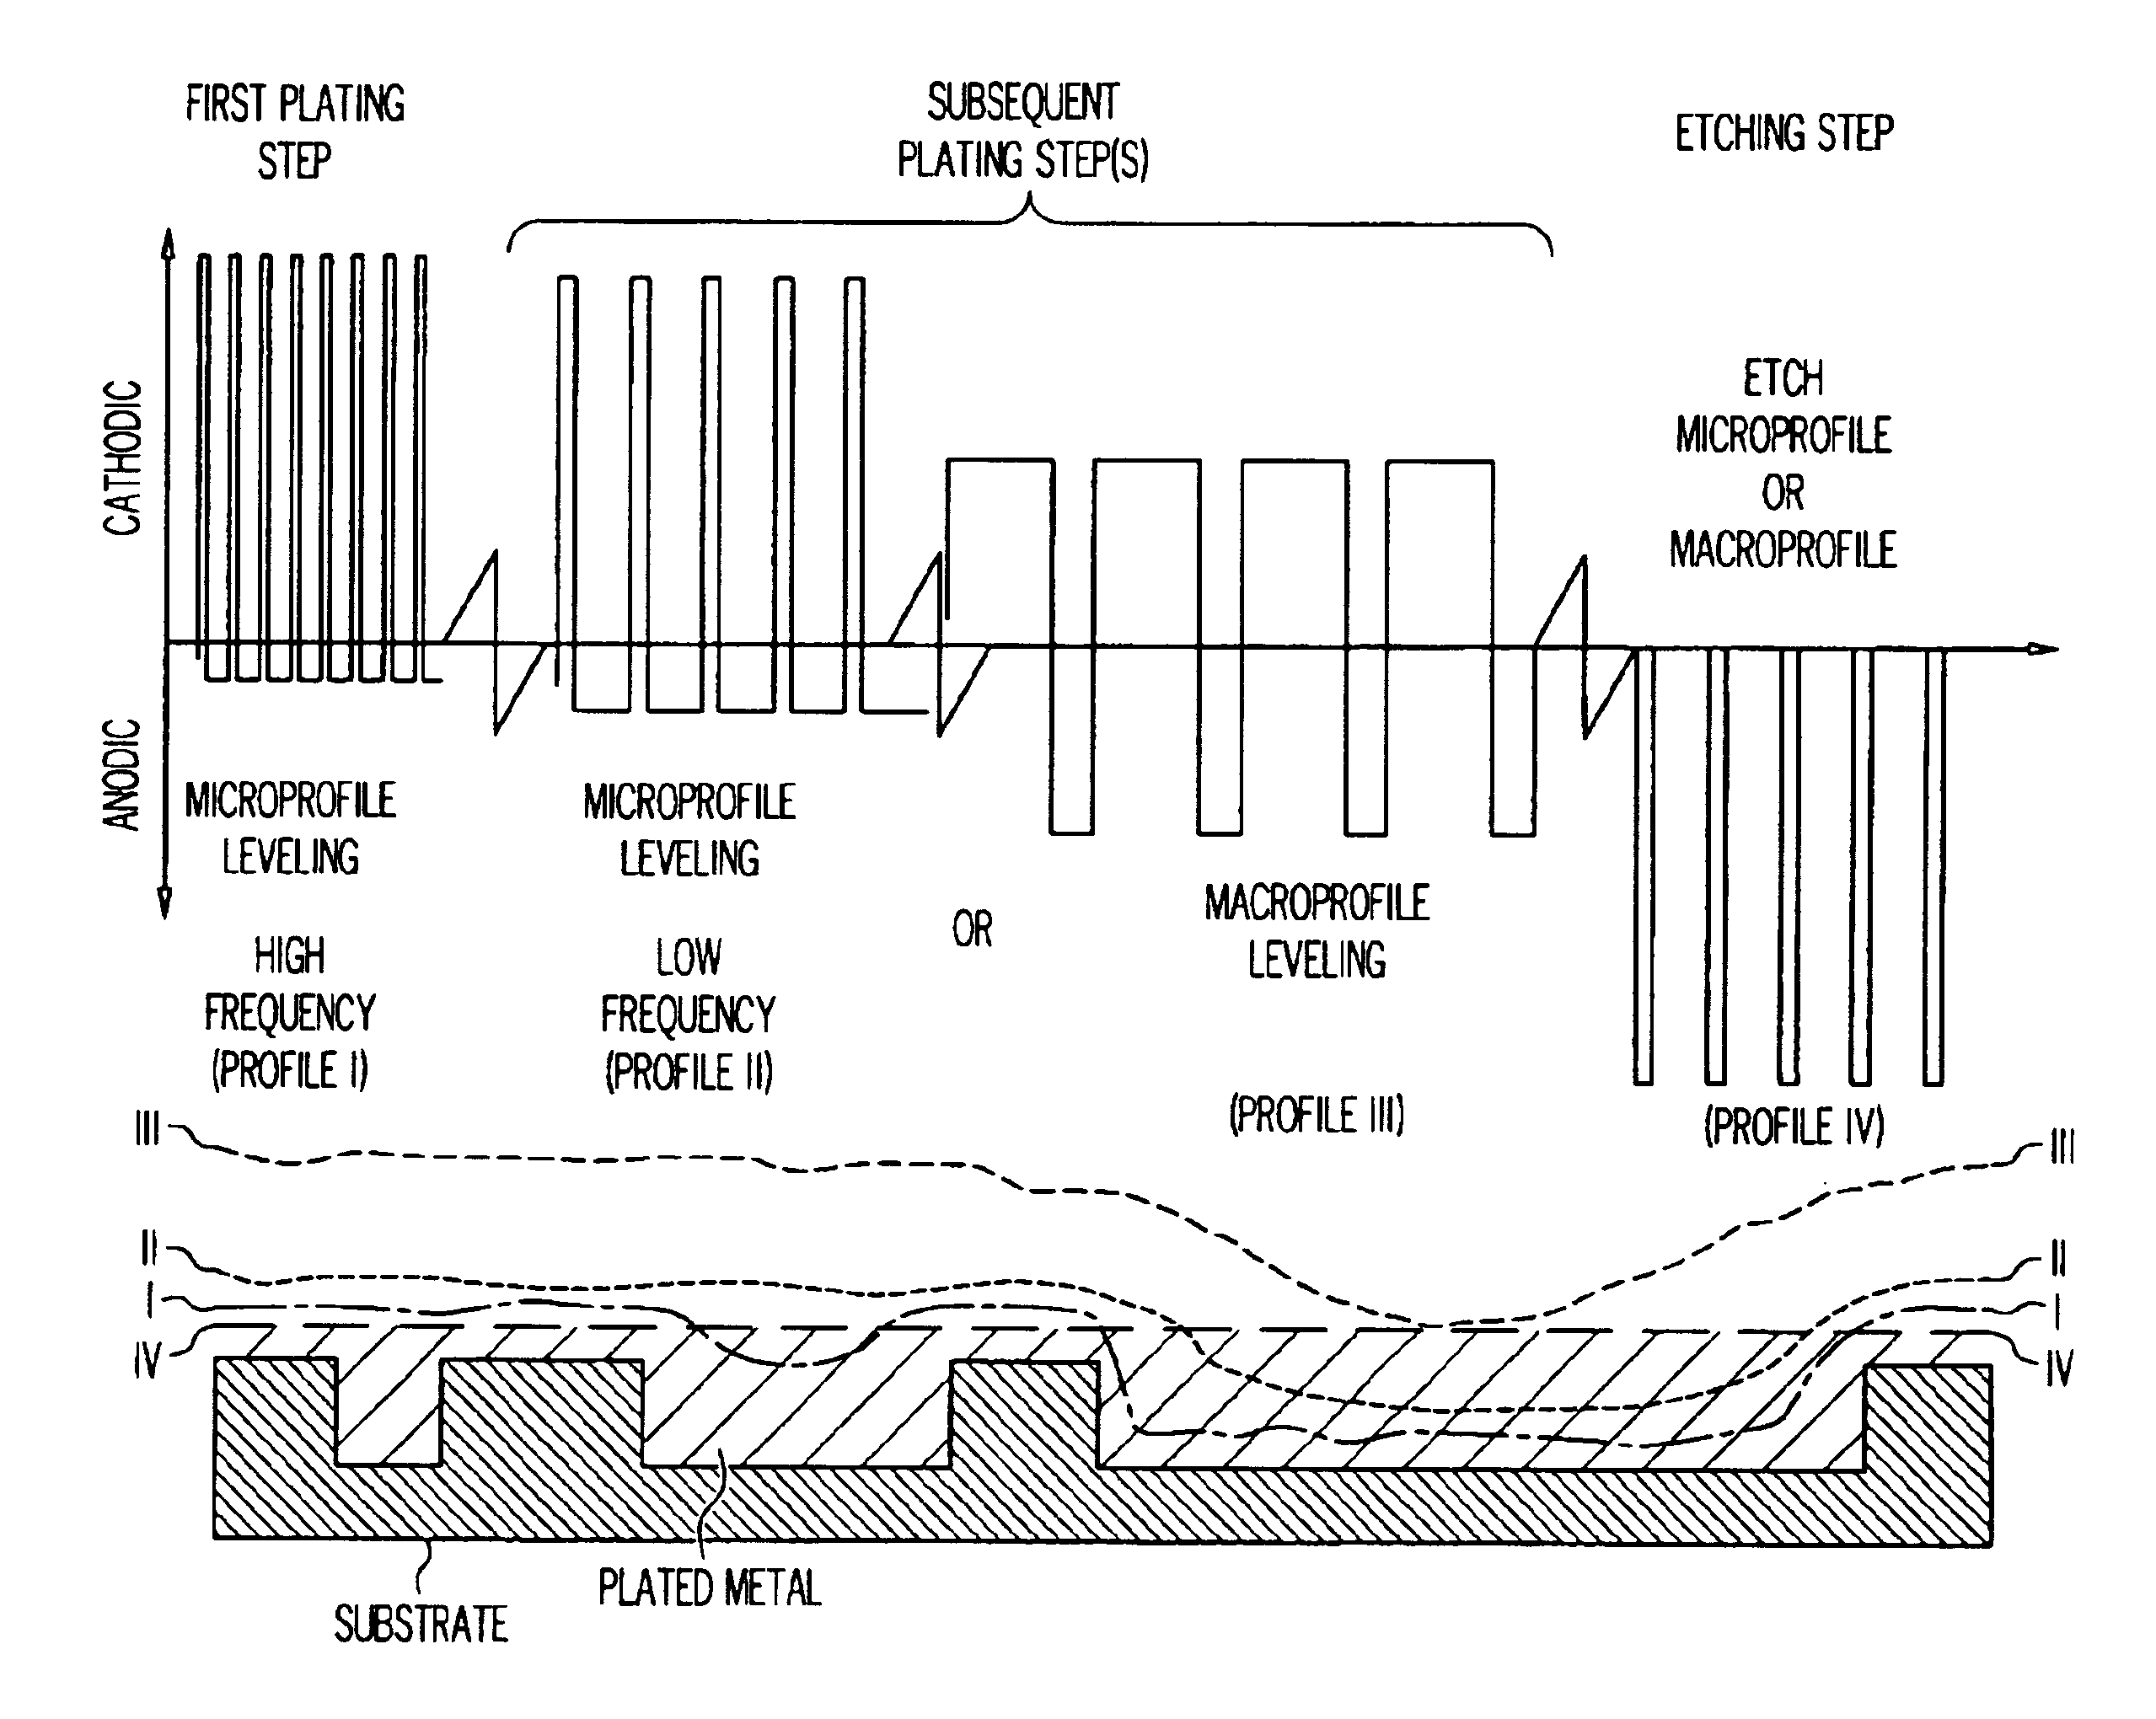 Method for electrochemical metallization and planarization of semiconductor substrates having features of different sizes